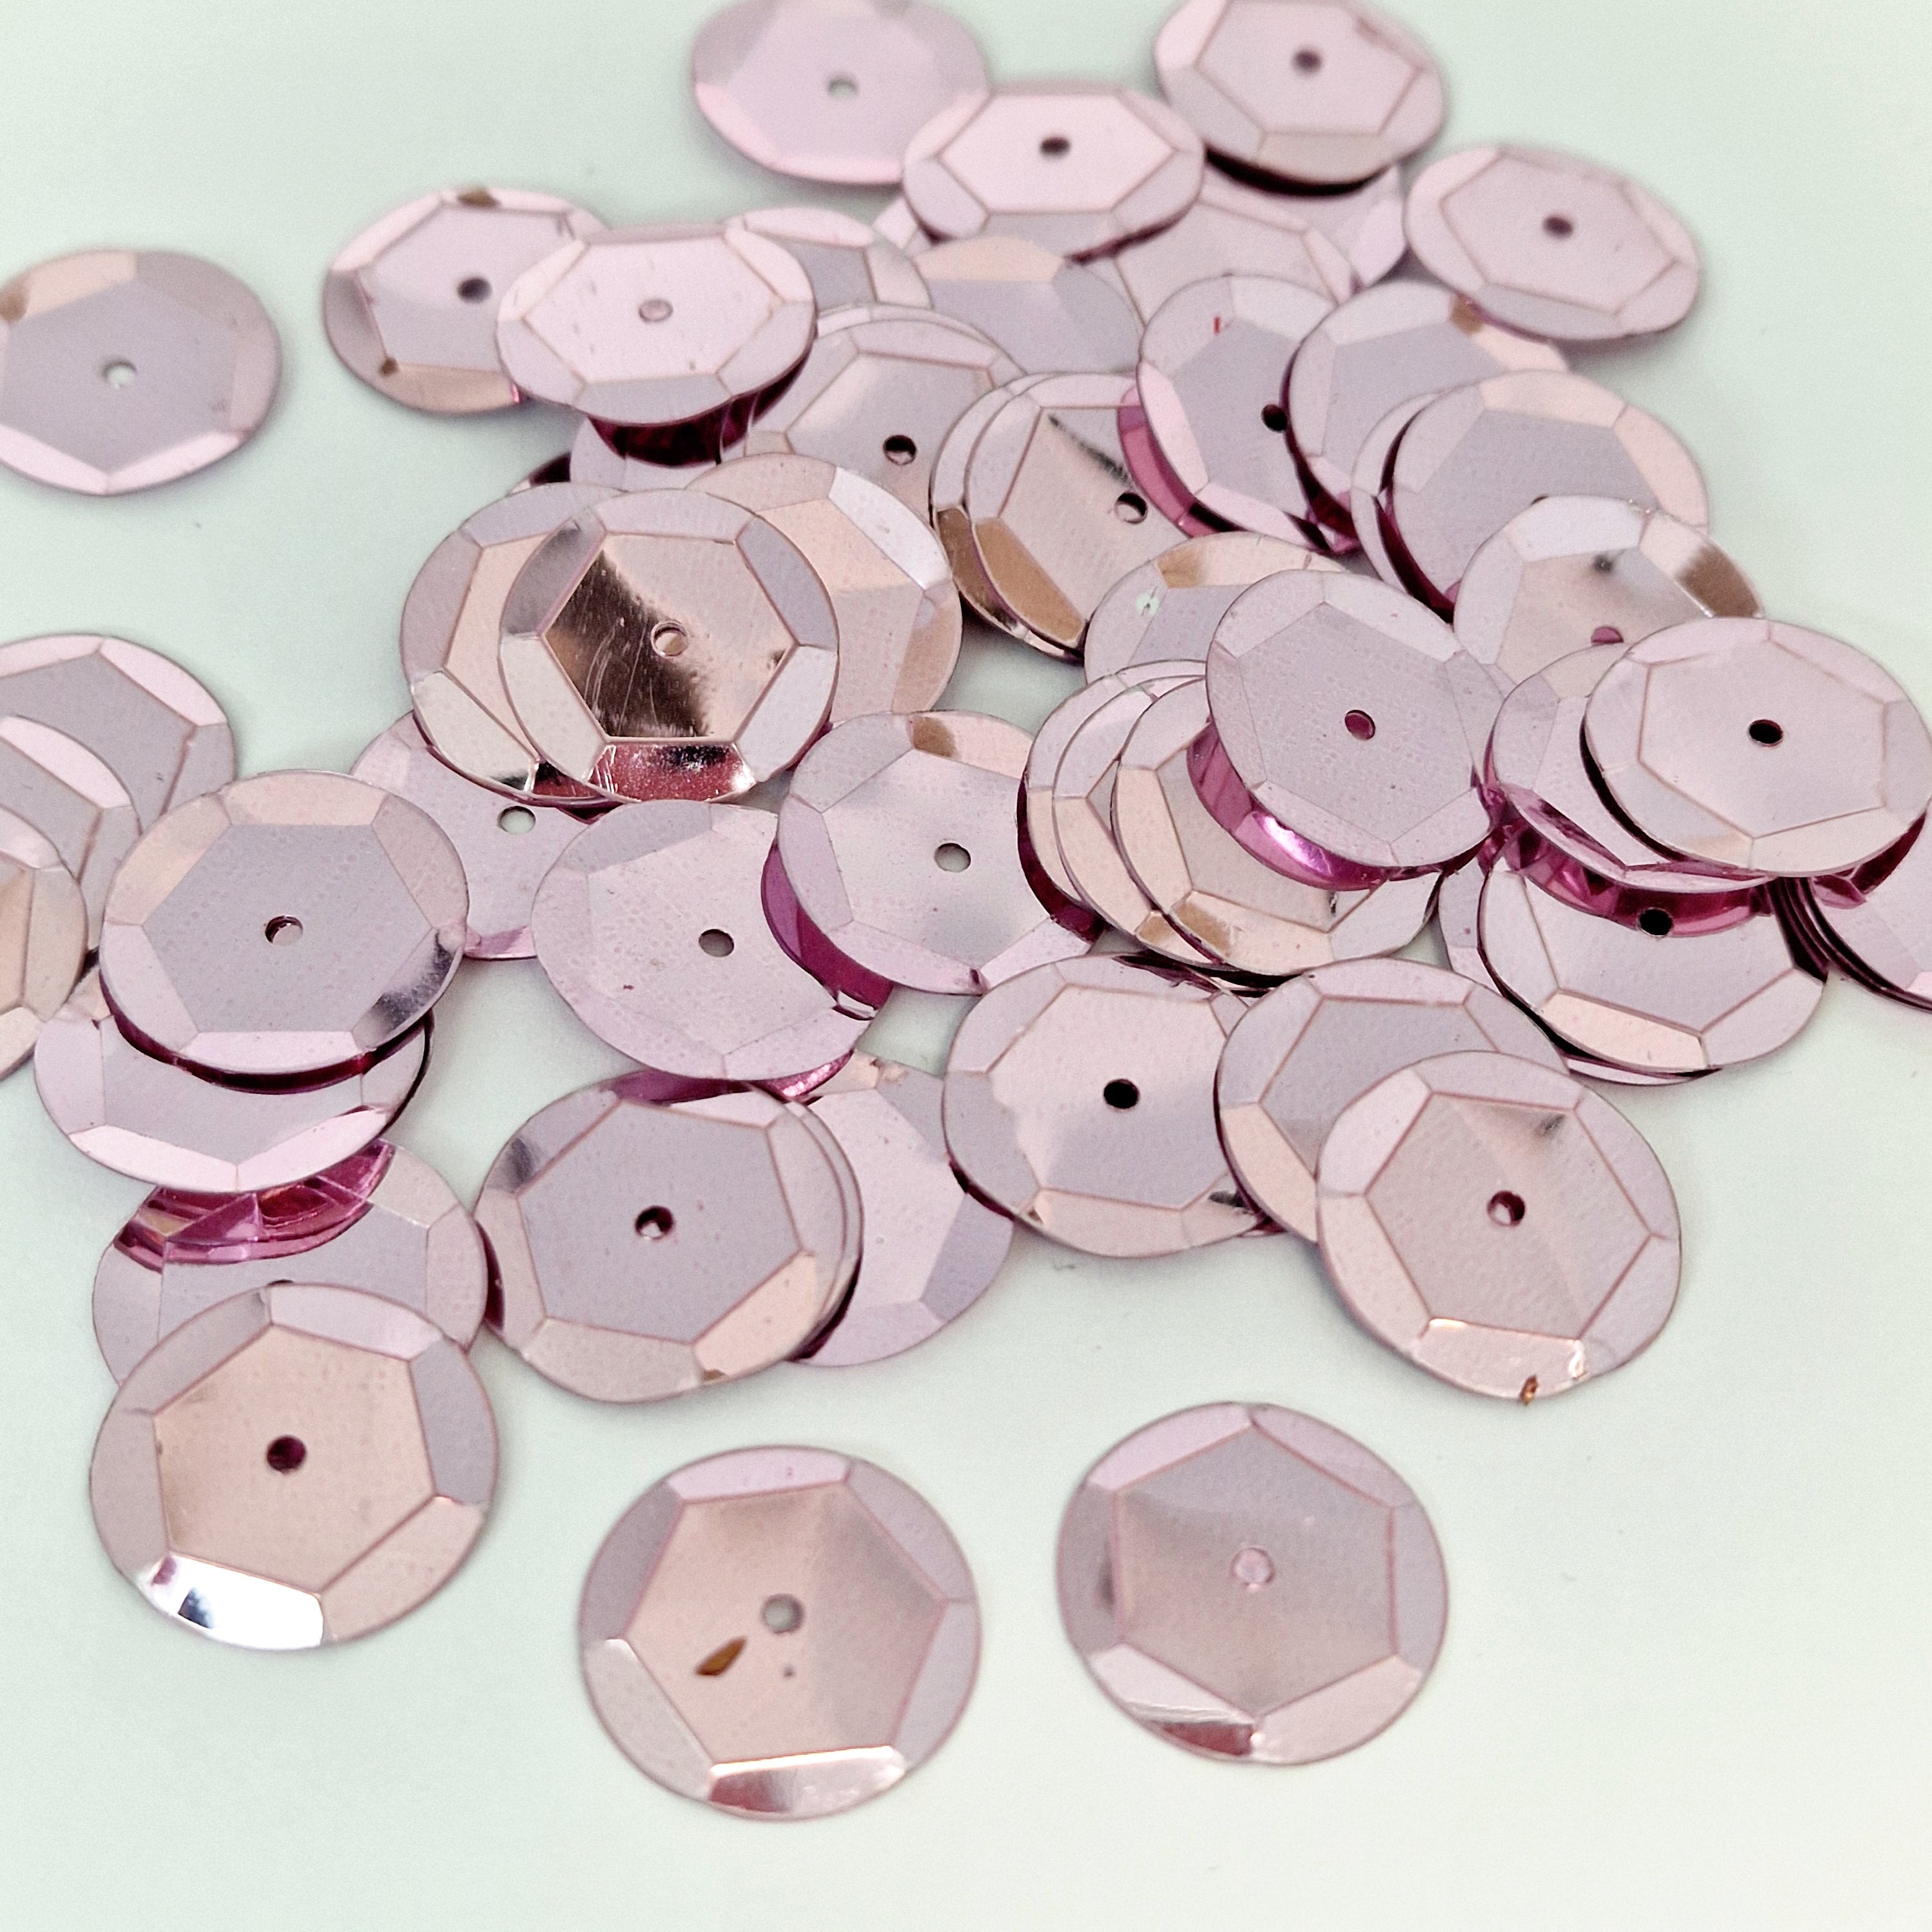 MajorCrafts 40grams 12mm Light Pink Round Sew-On Cup Sequins Q09